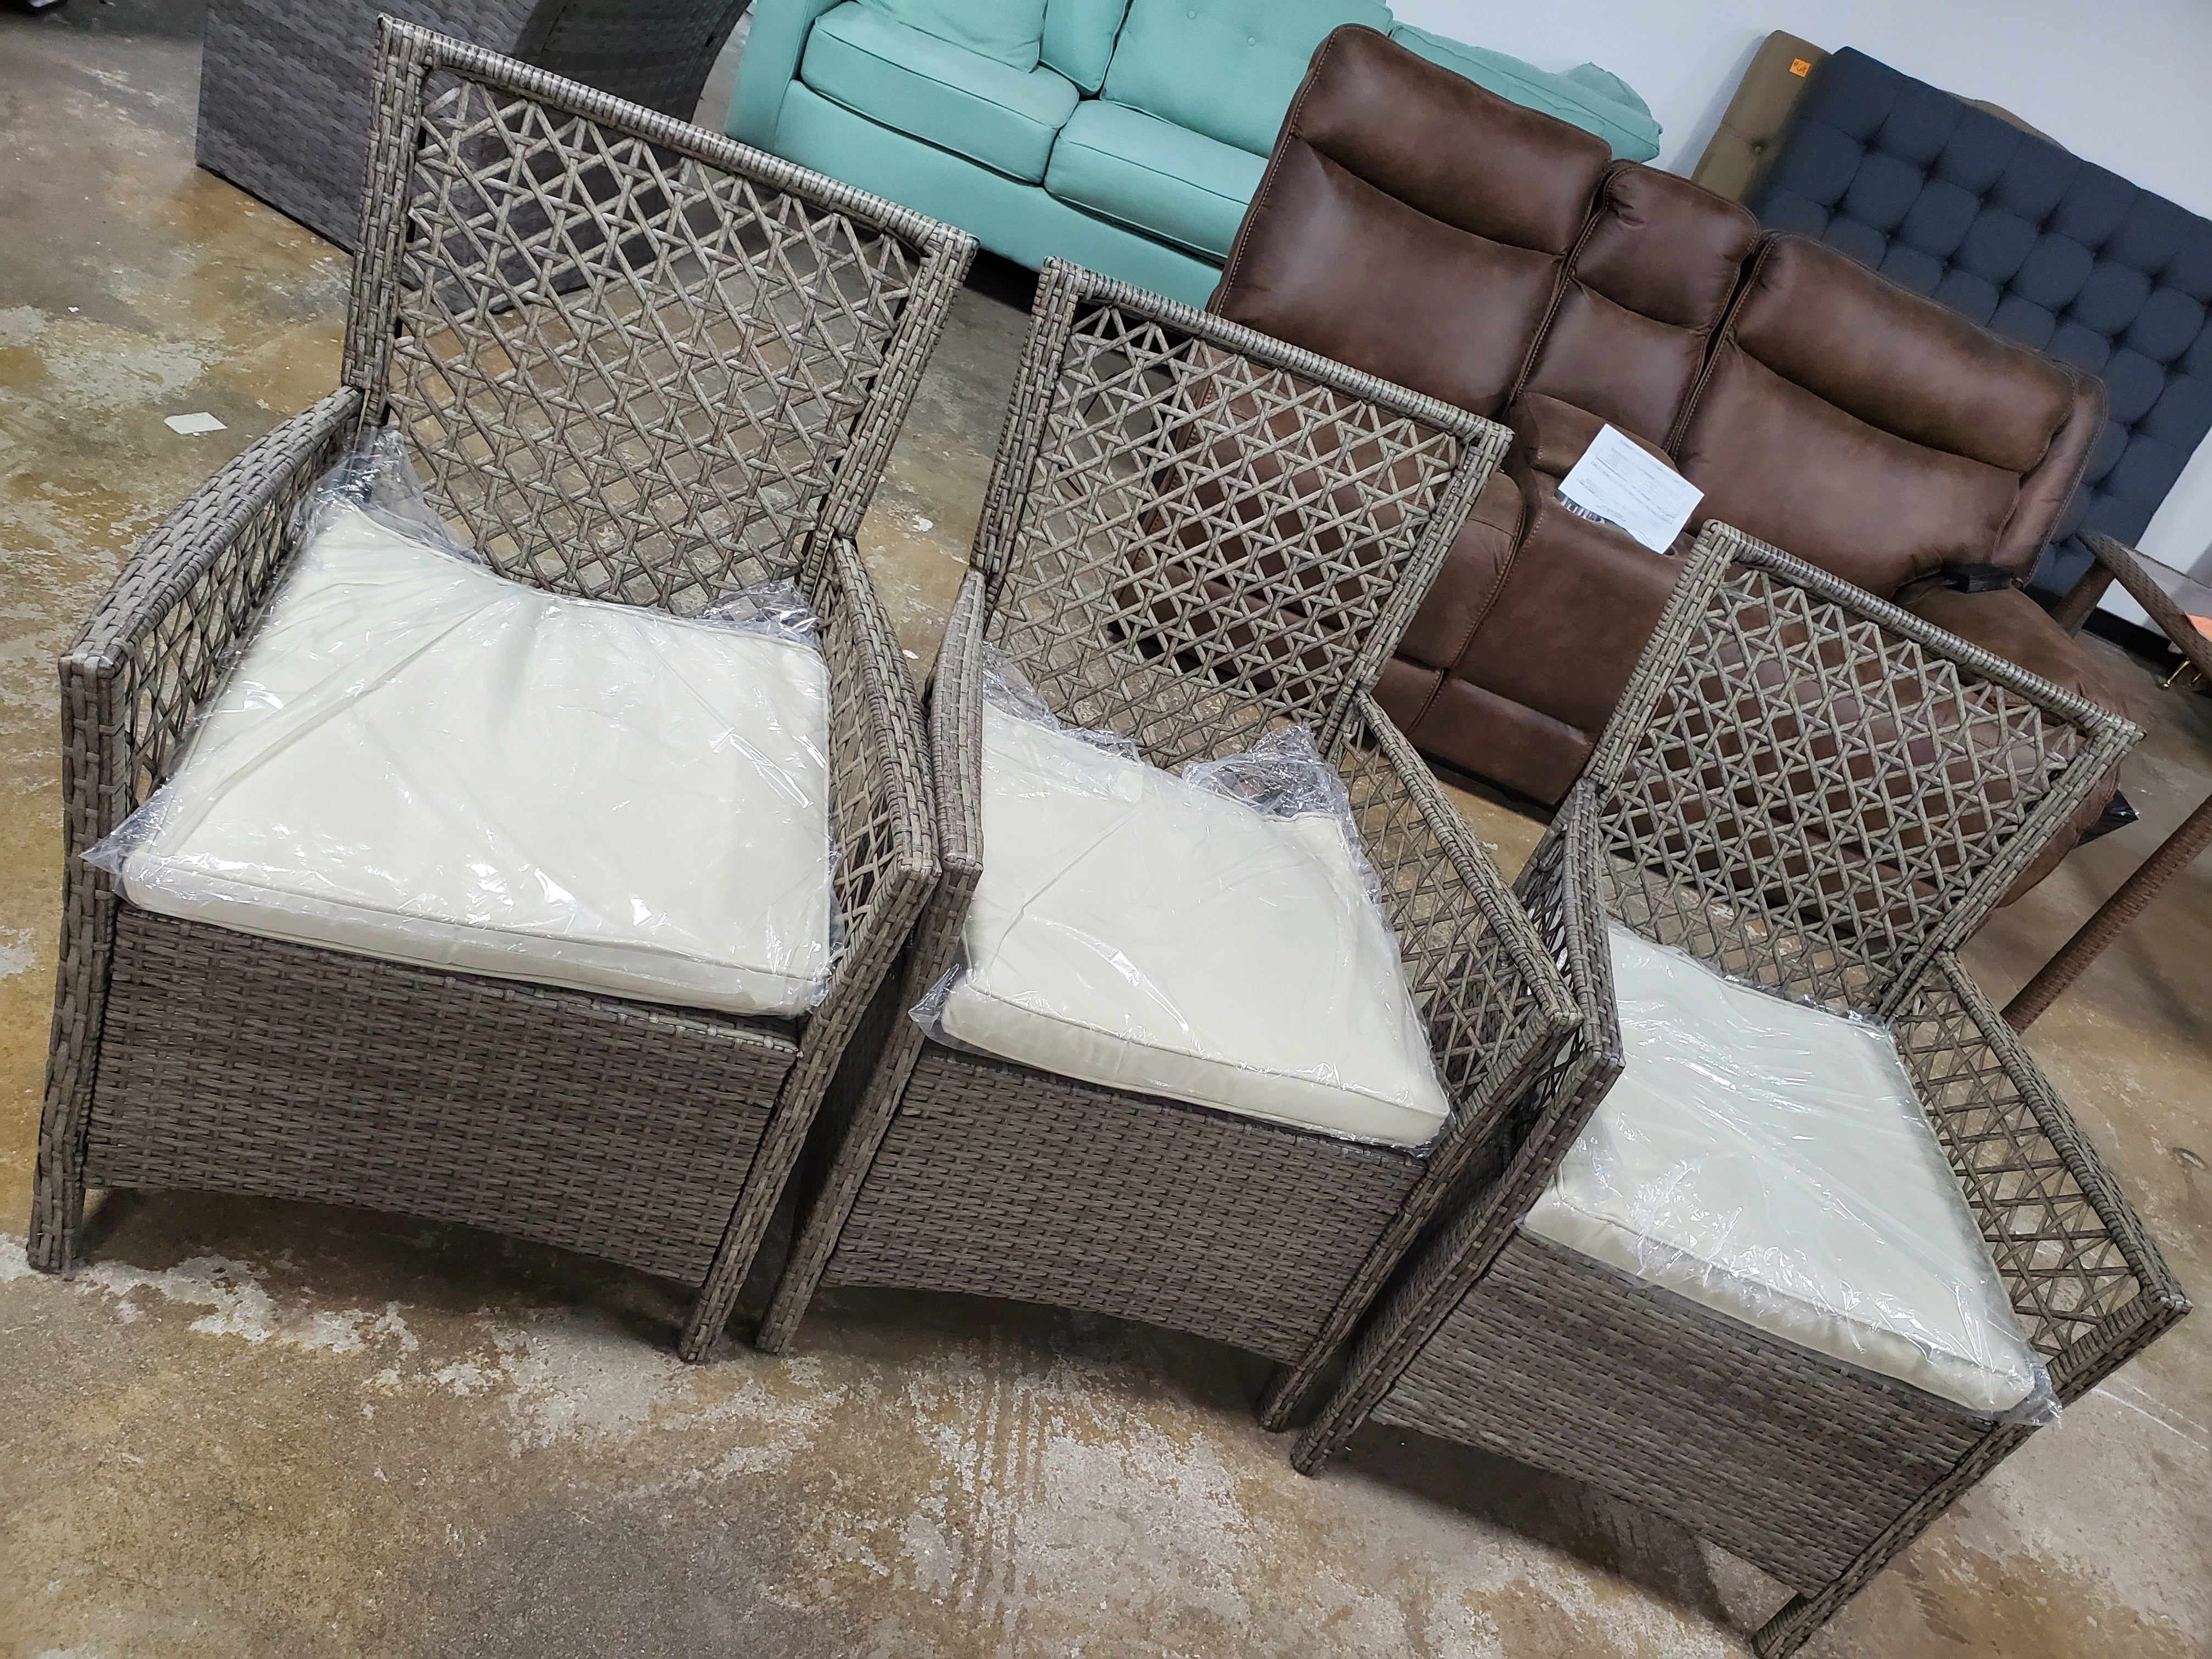 Set of 3 Rattan Wicker Chairs with 3 Seat Cushions